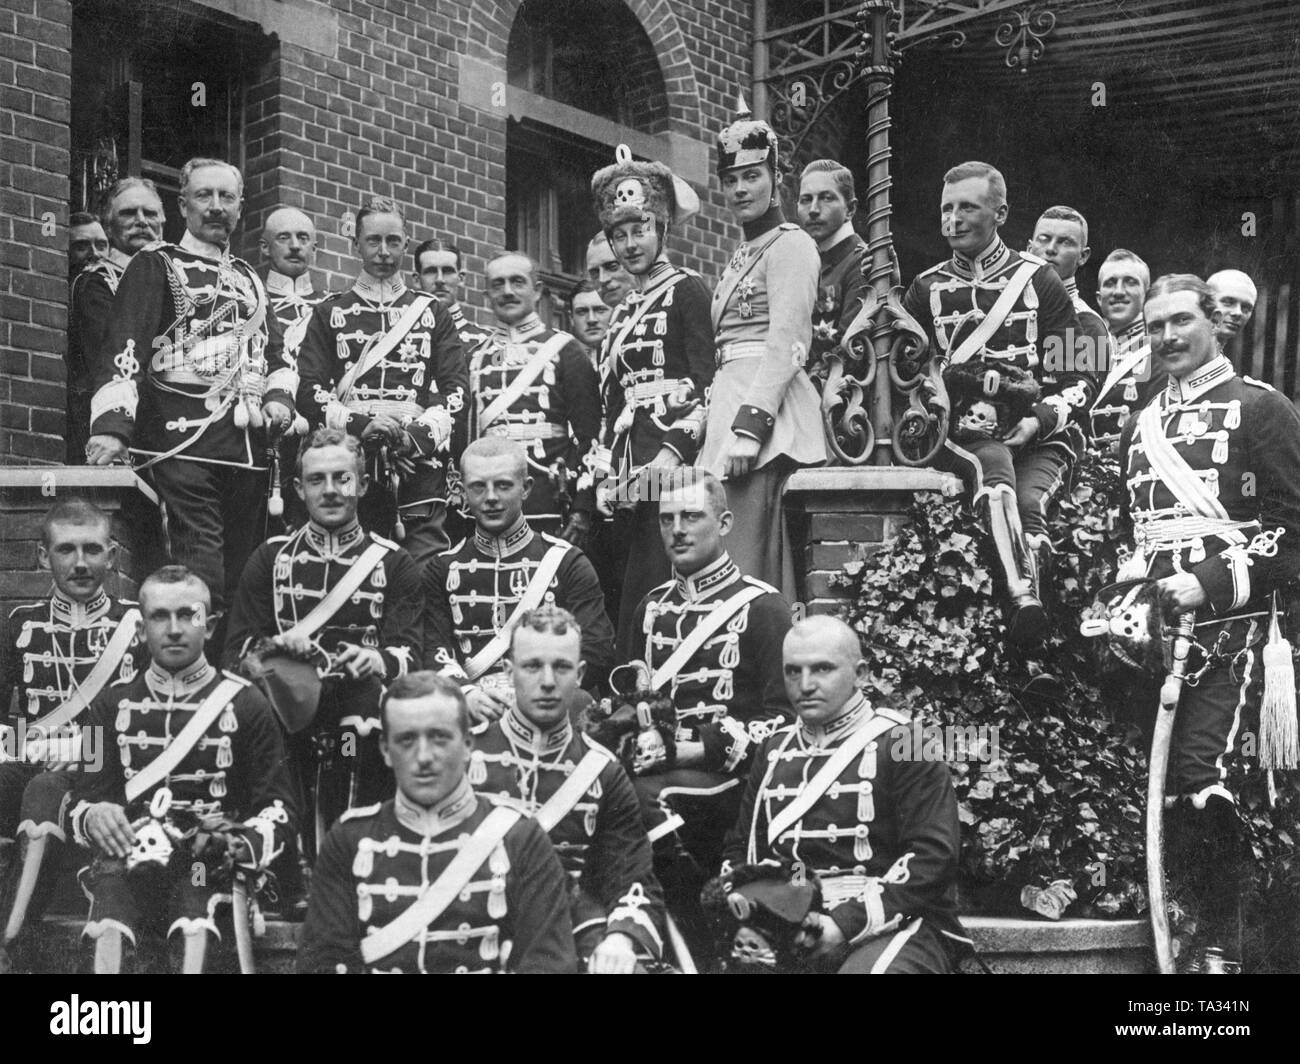 Emperor Wilhelm II (3rd row, 1st from left) visited together with his daughter Viktoria Luise of Prussia (3rd row 4th from left) his eldest son Crown Prince Wilhelm of Prussia (3rd row, 2nd from left) and his wife Crown Princess Cecilie of Mecklenburg (3rd row, 5th from the left) in Danzig. There the Crown Prince was commander of the 1st Leibhusaren Regiment. The members of the Prussian royal family wear the uniforms of their respective Leibhusaren regiment, Crown Princess Cecilie the uniform of the Dragoon Regiment King Frederick III (No. 8). Stock Photo